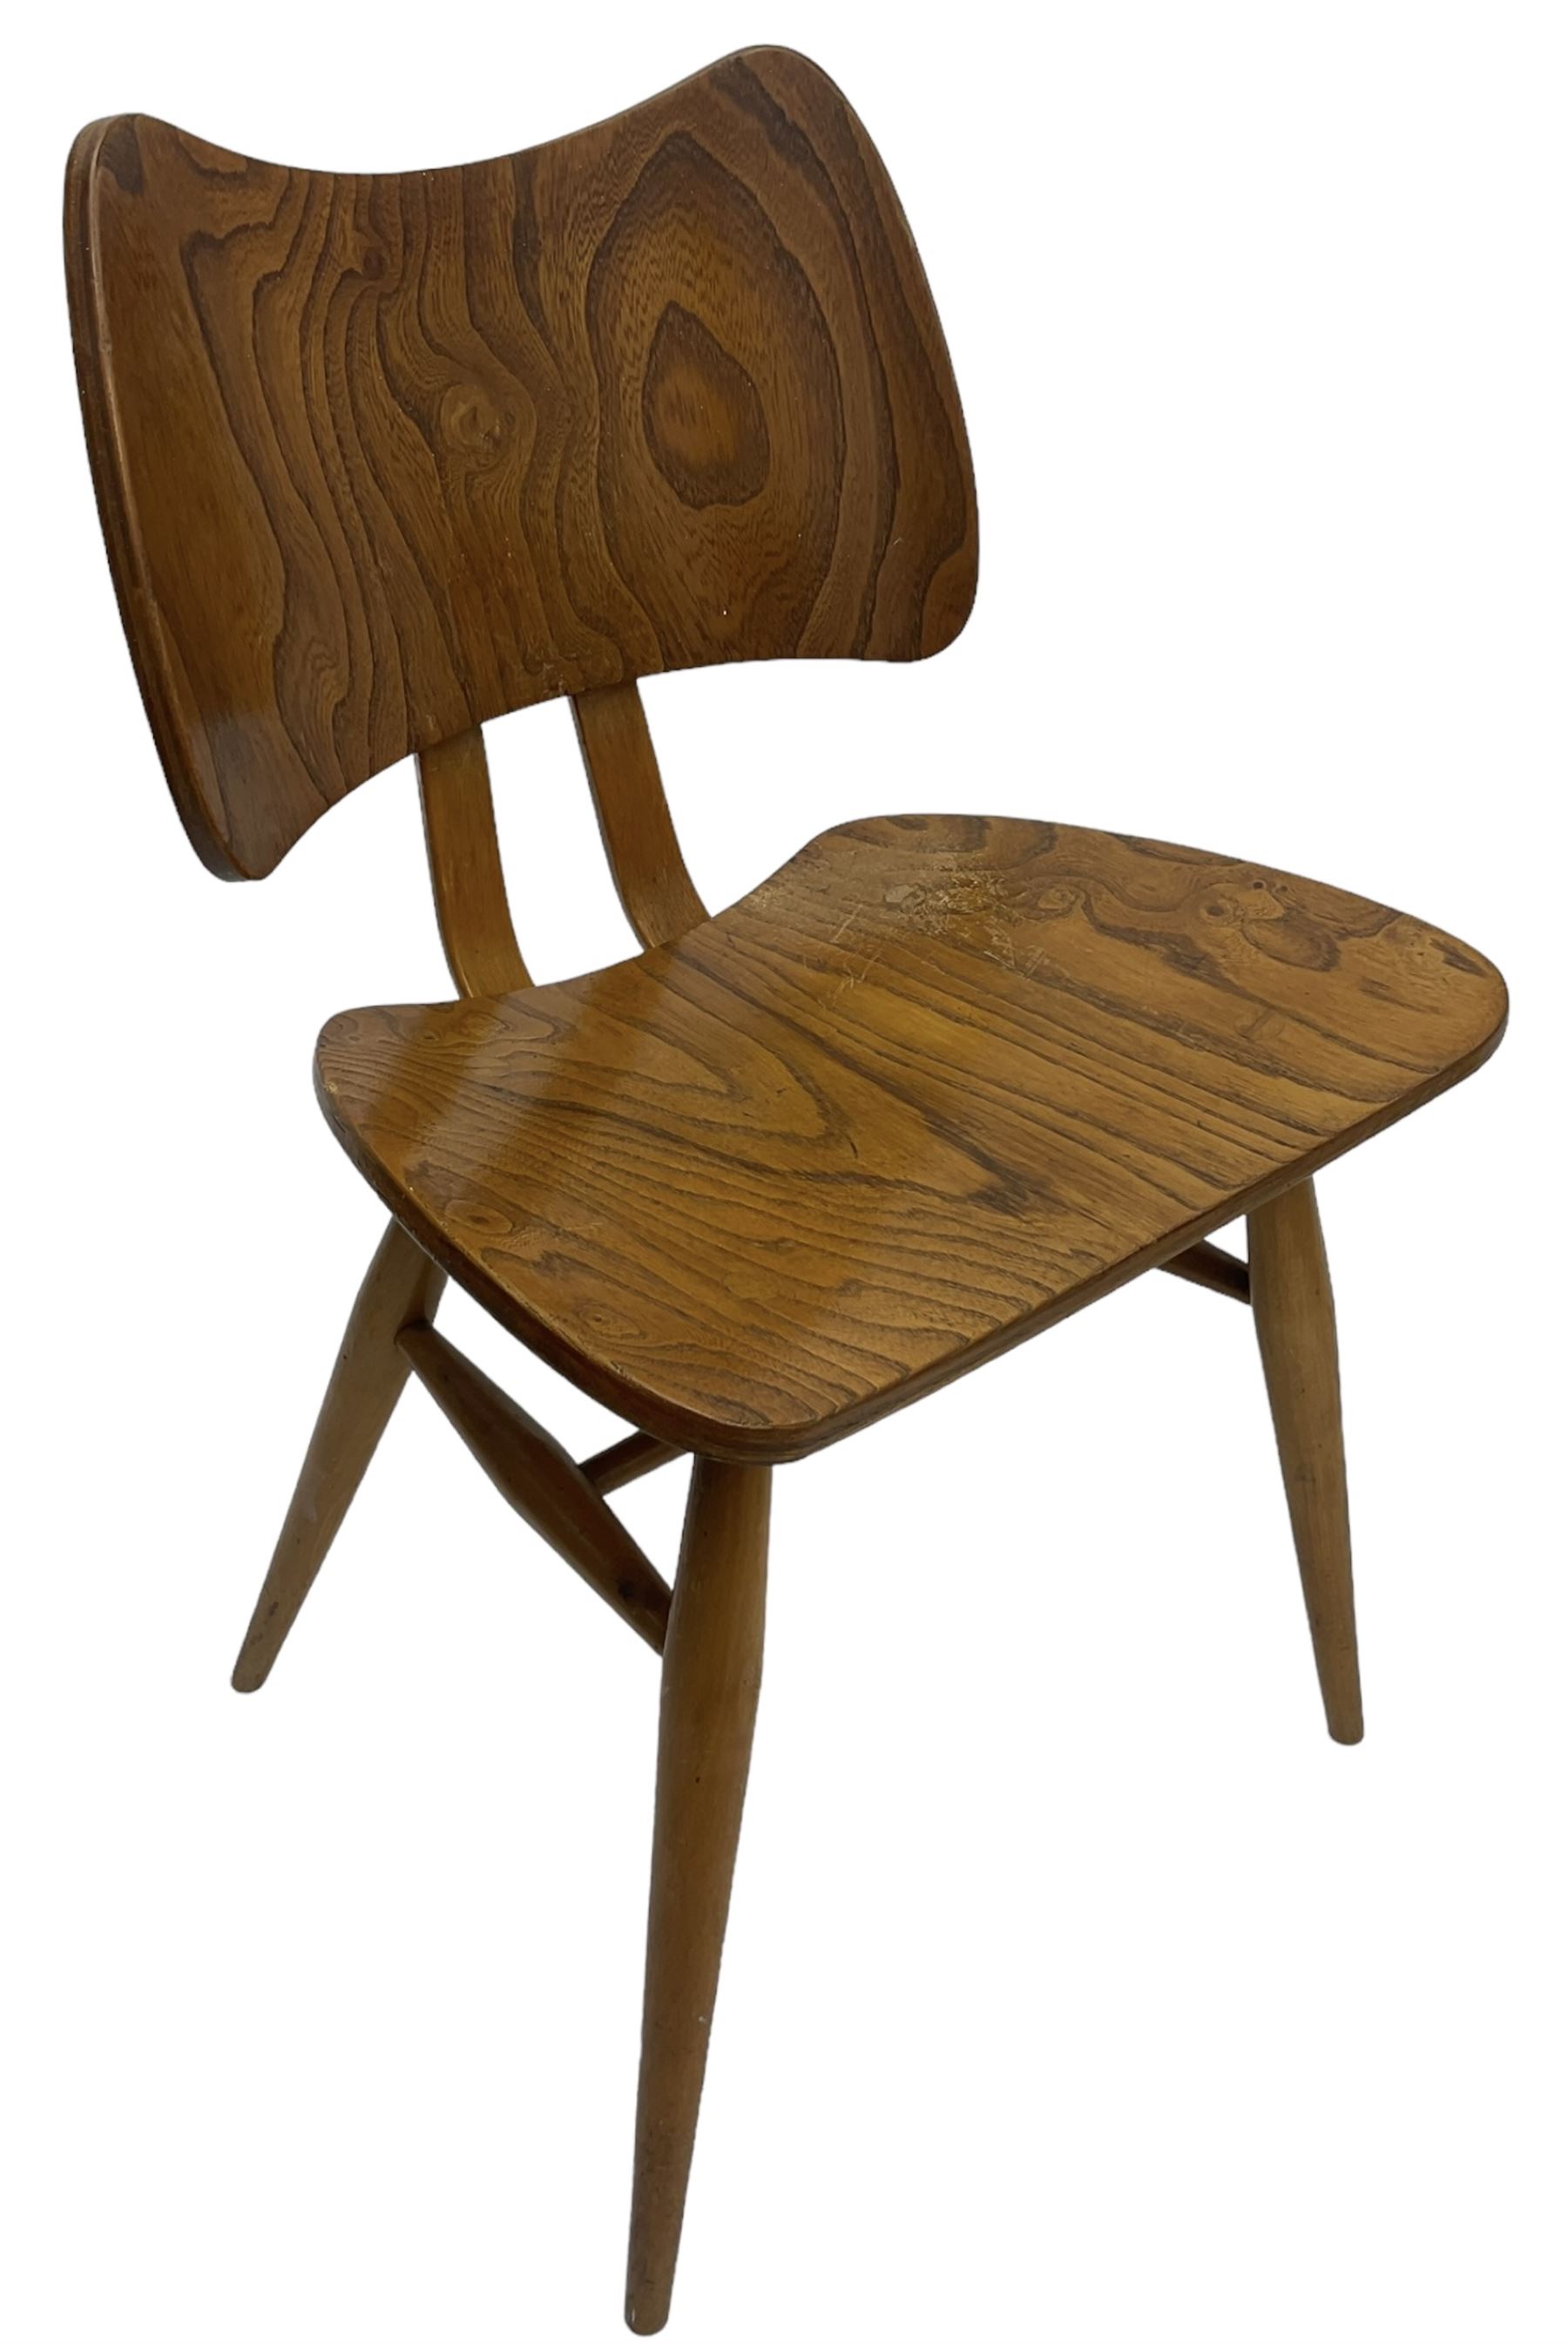 Lucian Ercolani - set of four ercol elm and beech model '401' dining chairs - Image 23 of 42